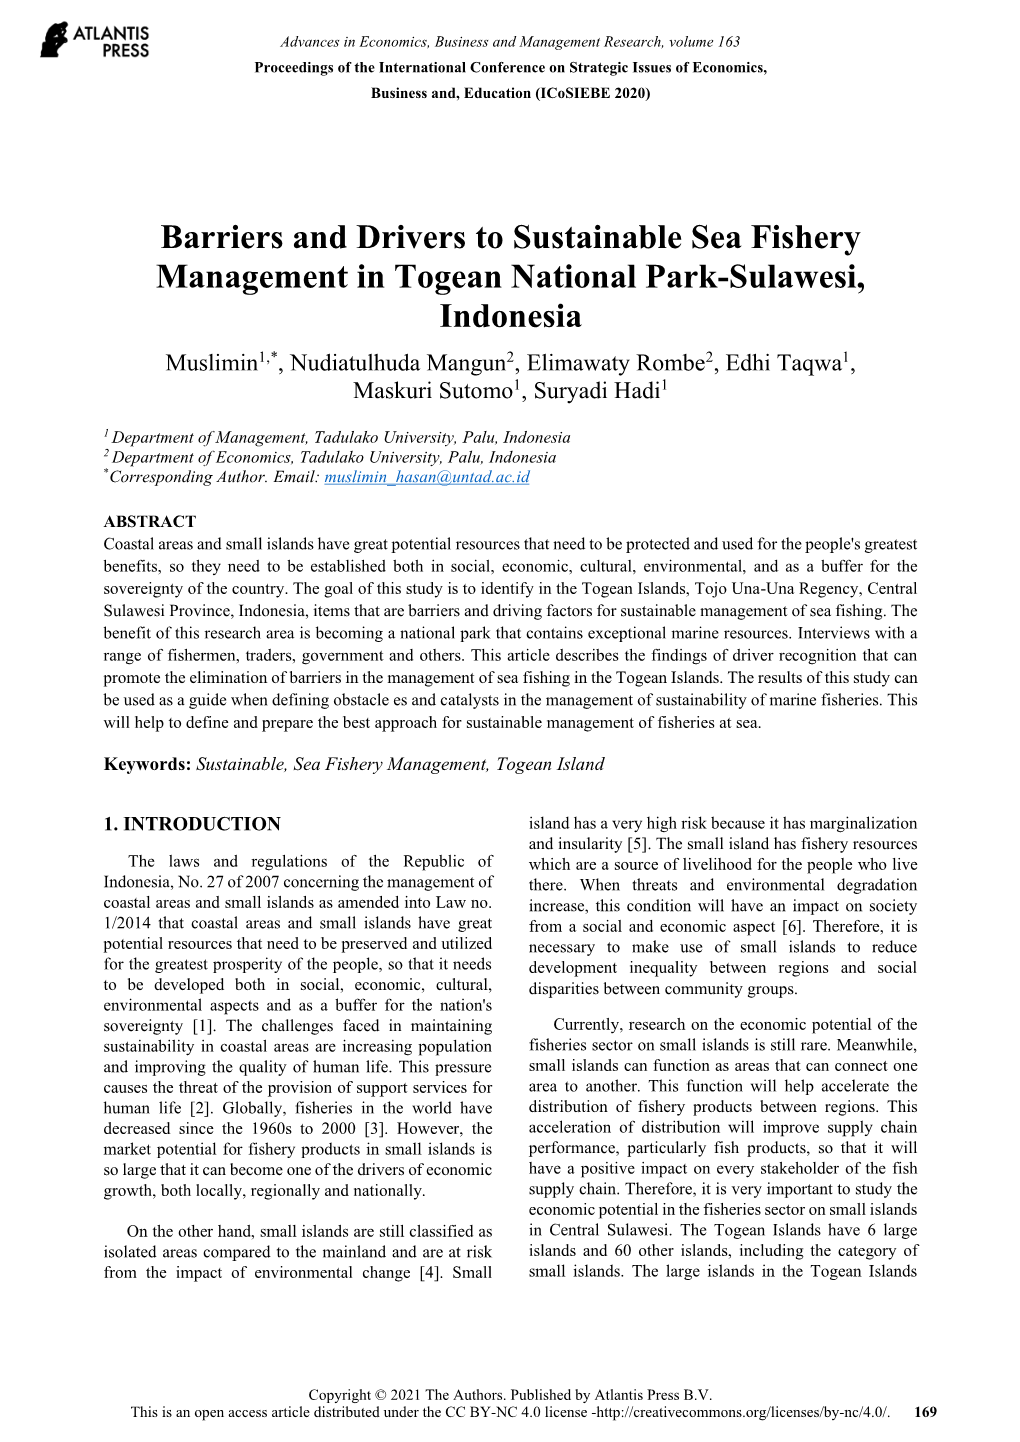 Barriers and Drivers to Sustainable Sea Fishery Management In